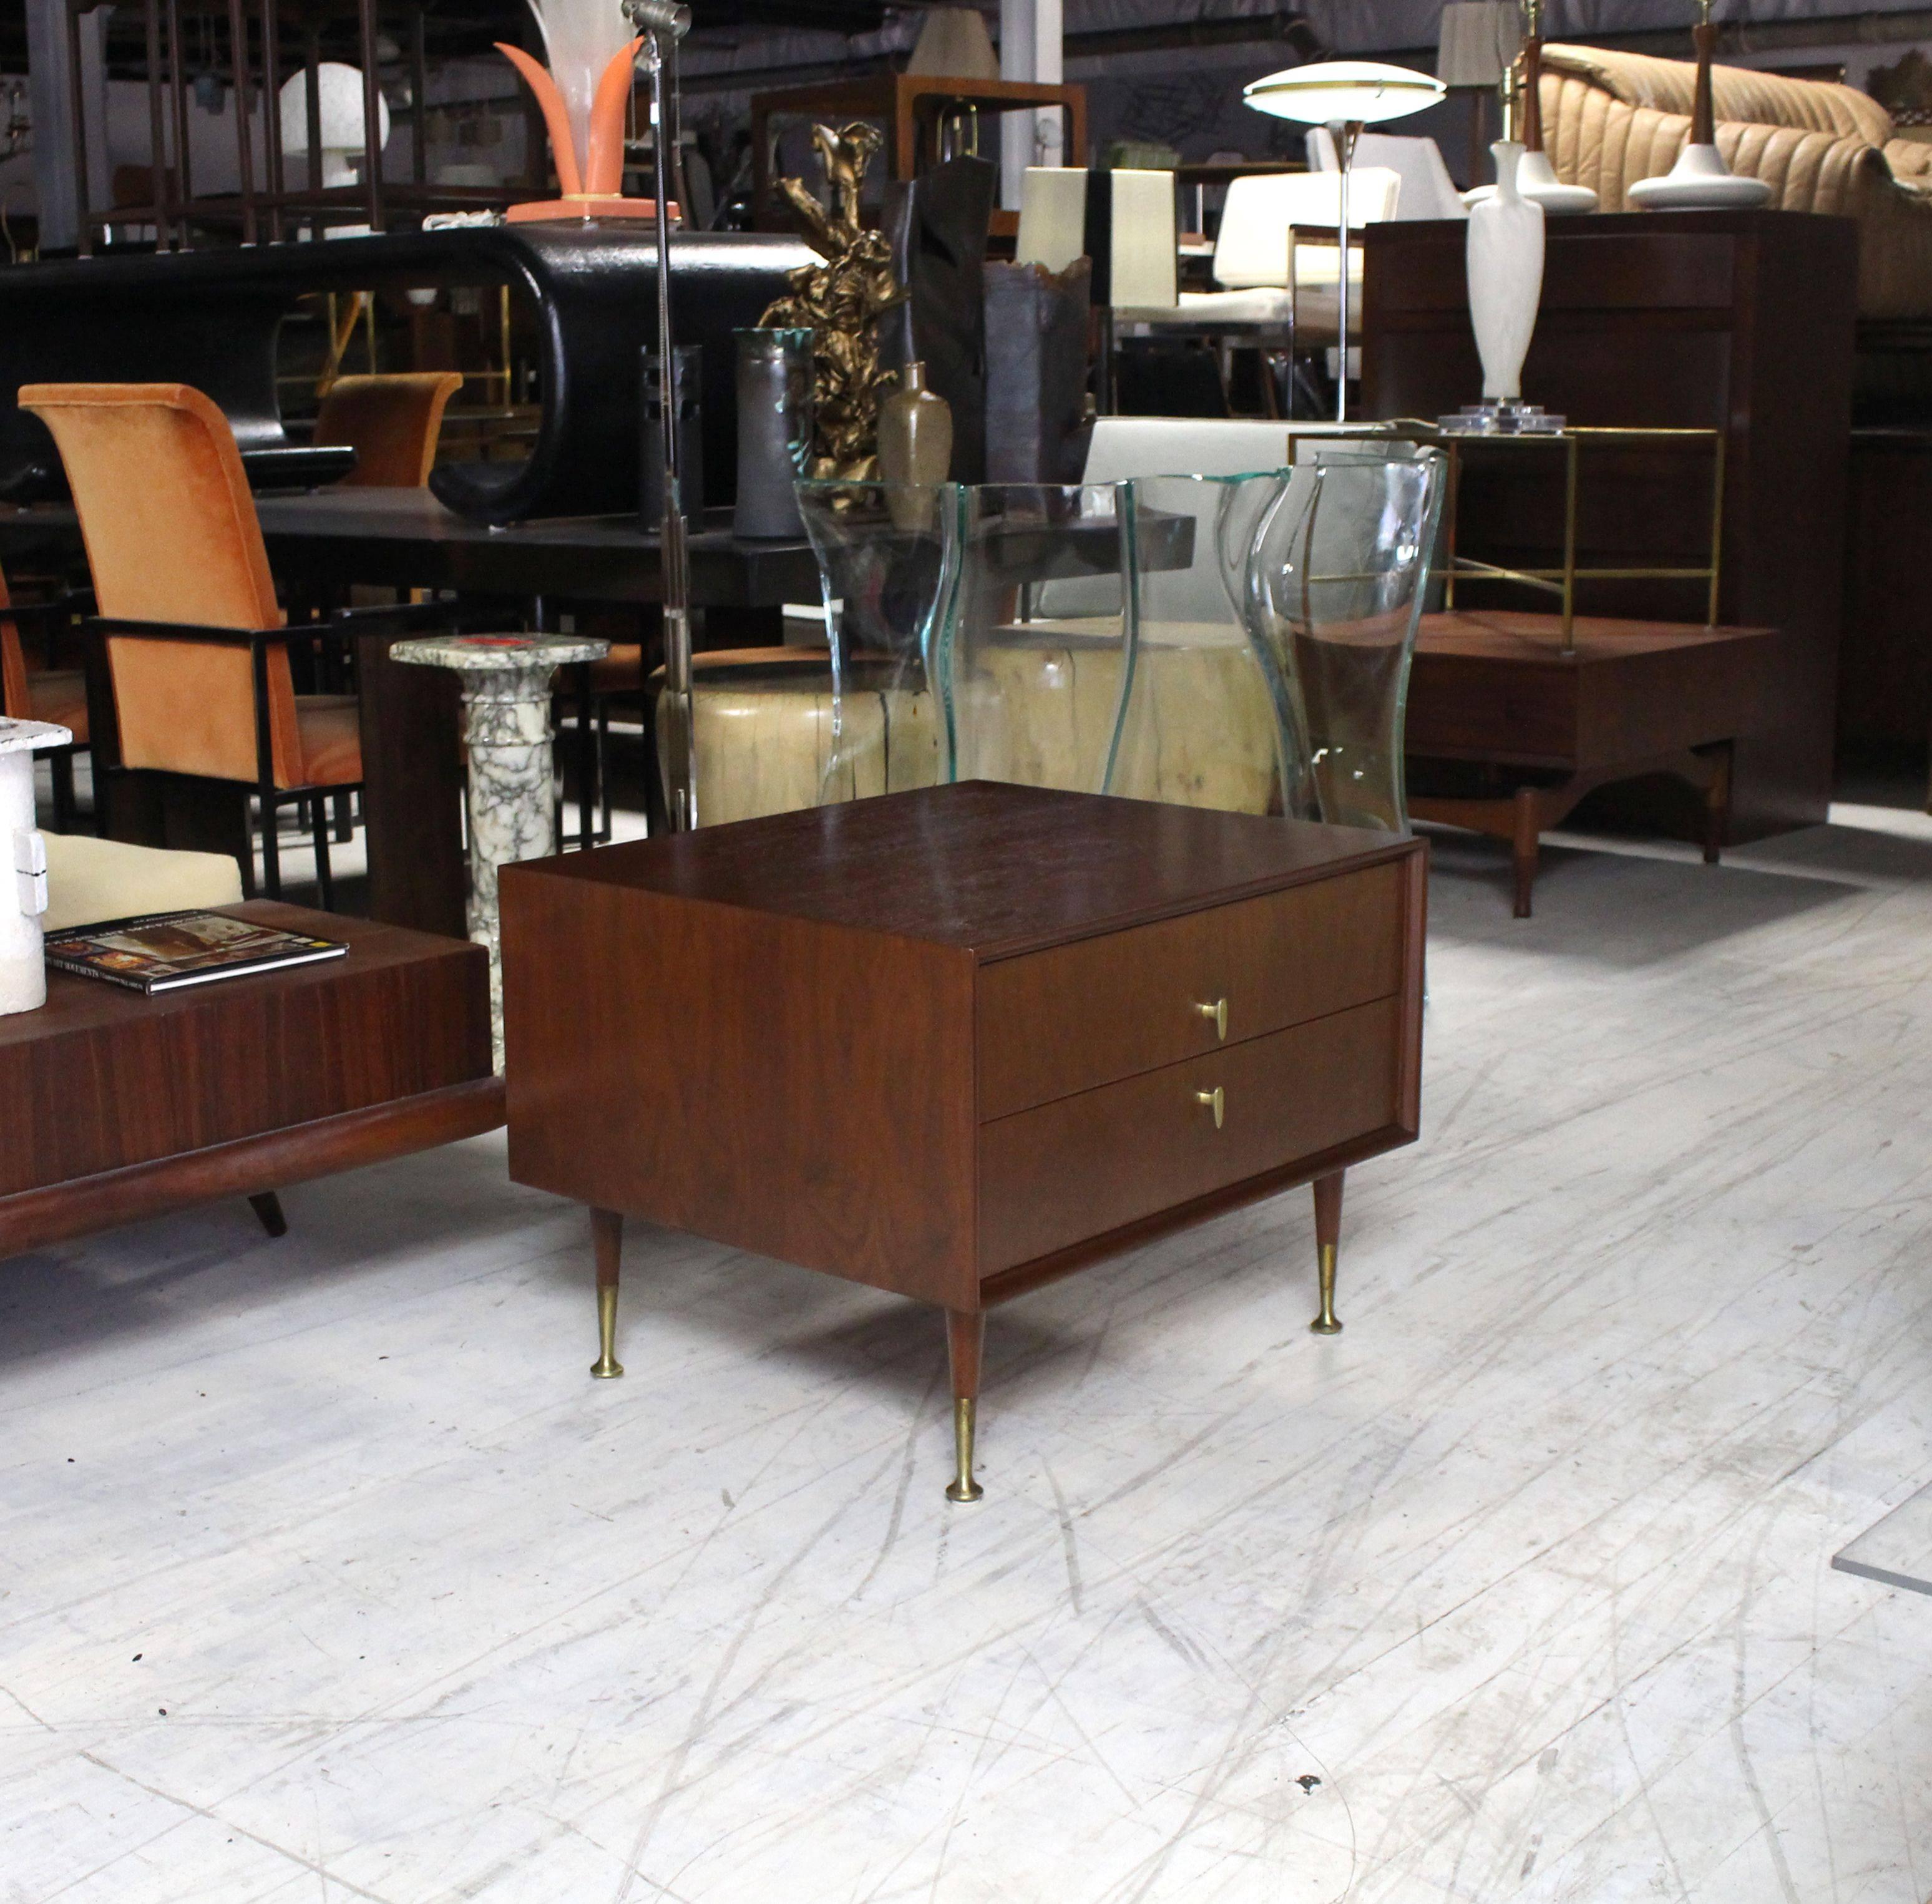 Very nice Mid-Century Modern end side table with two drawers and solid brass pulls.